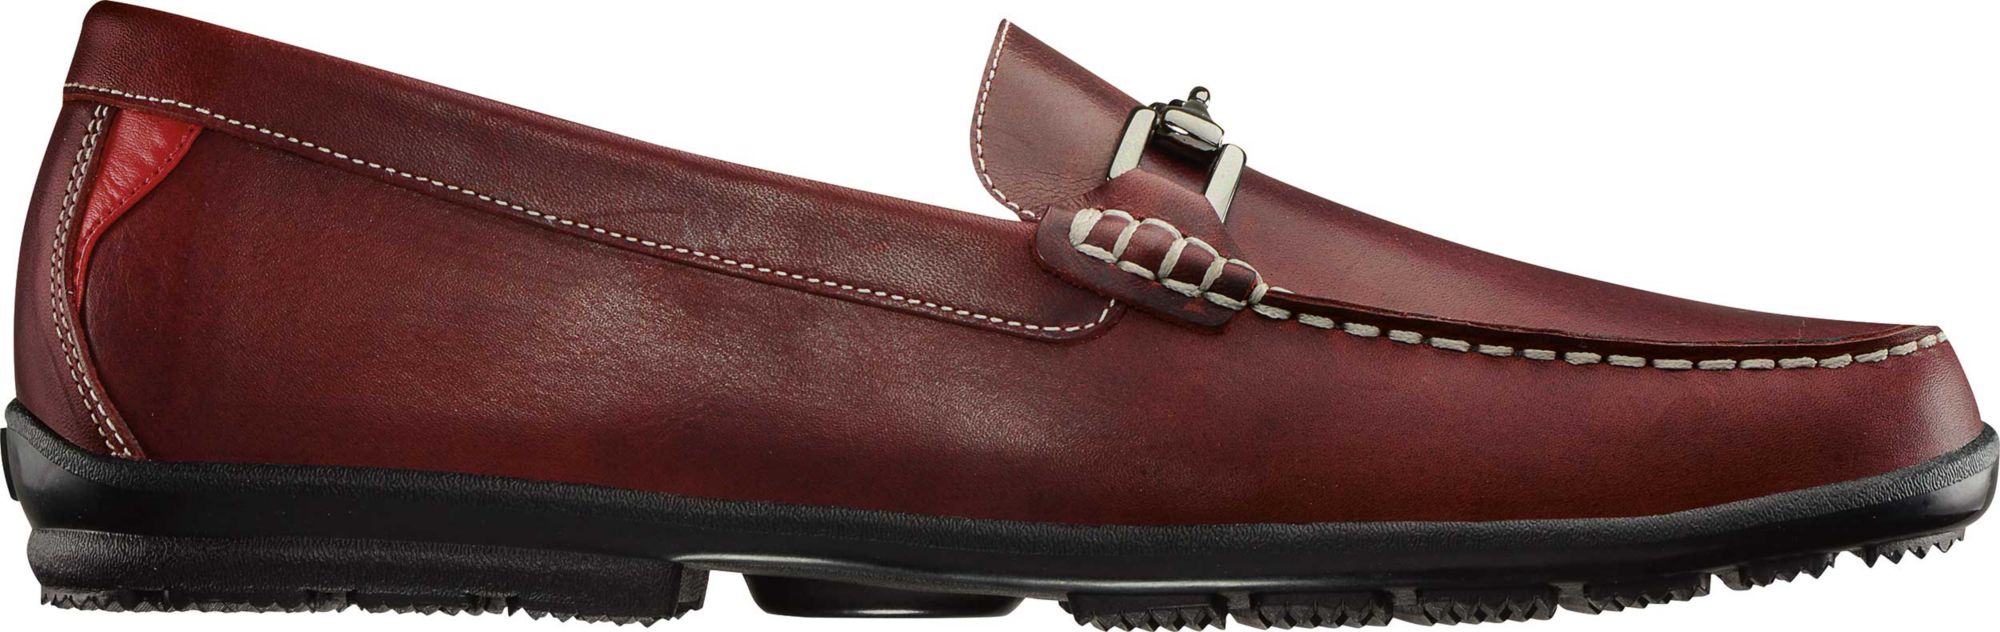 footjoy casual loafer